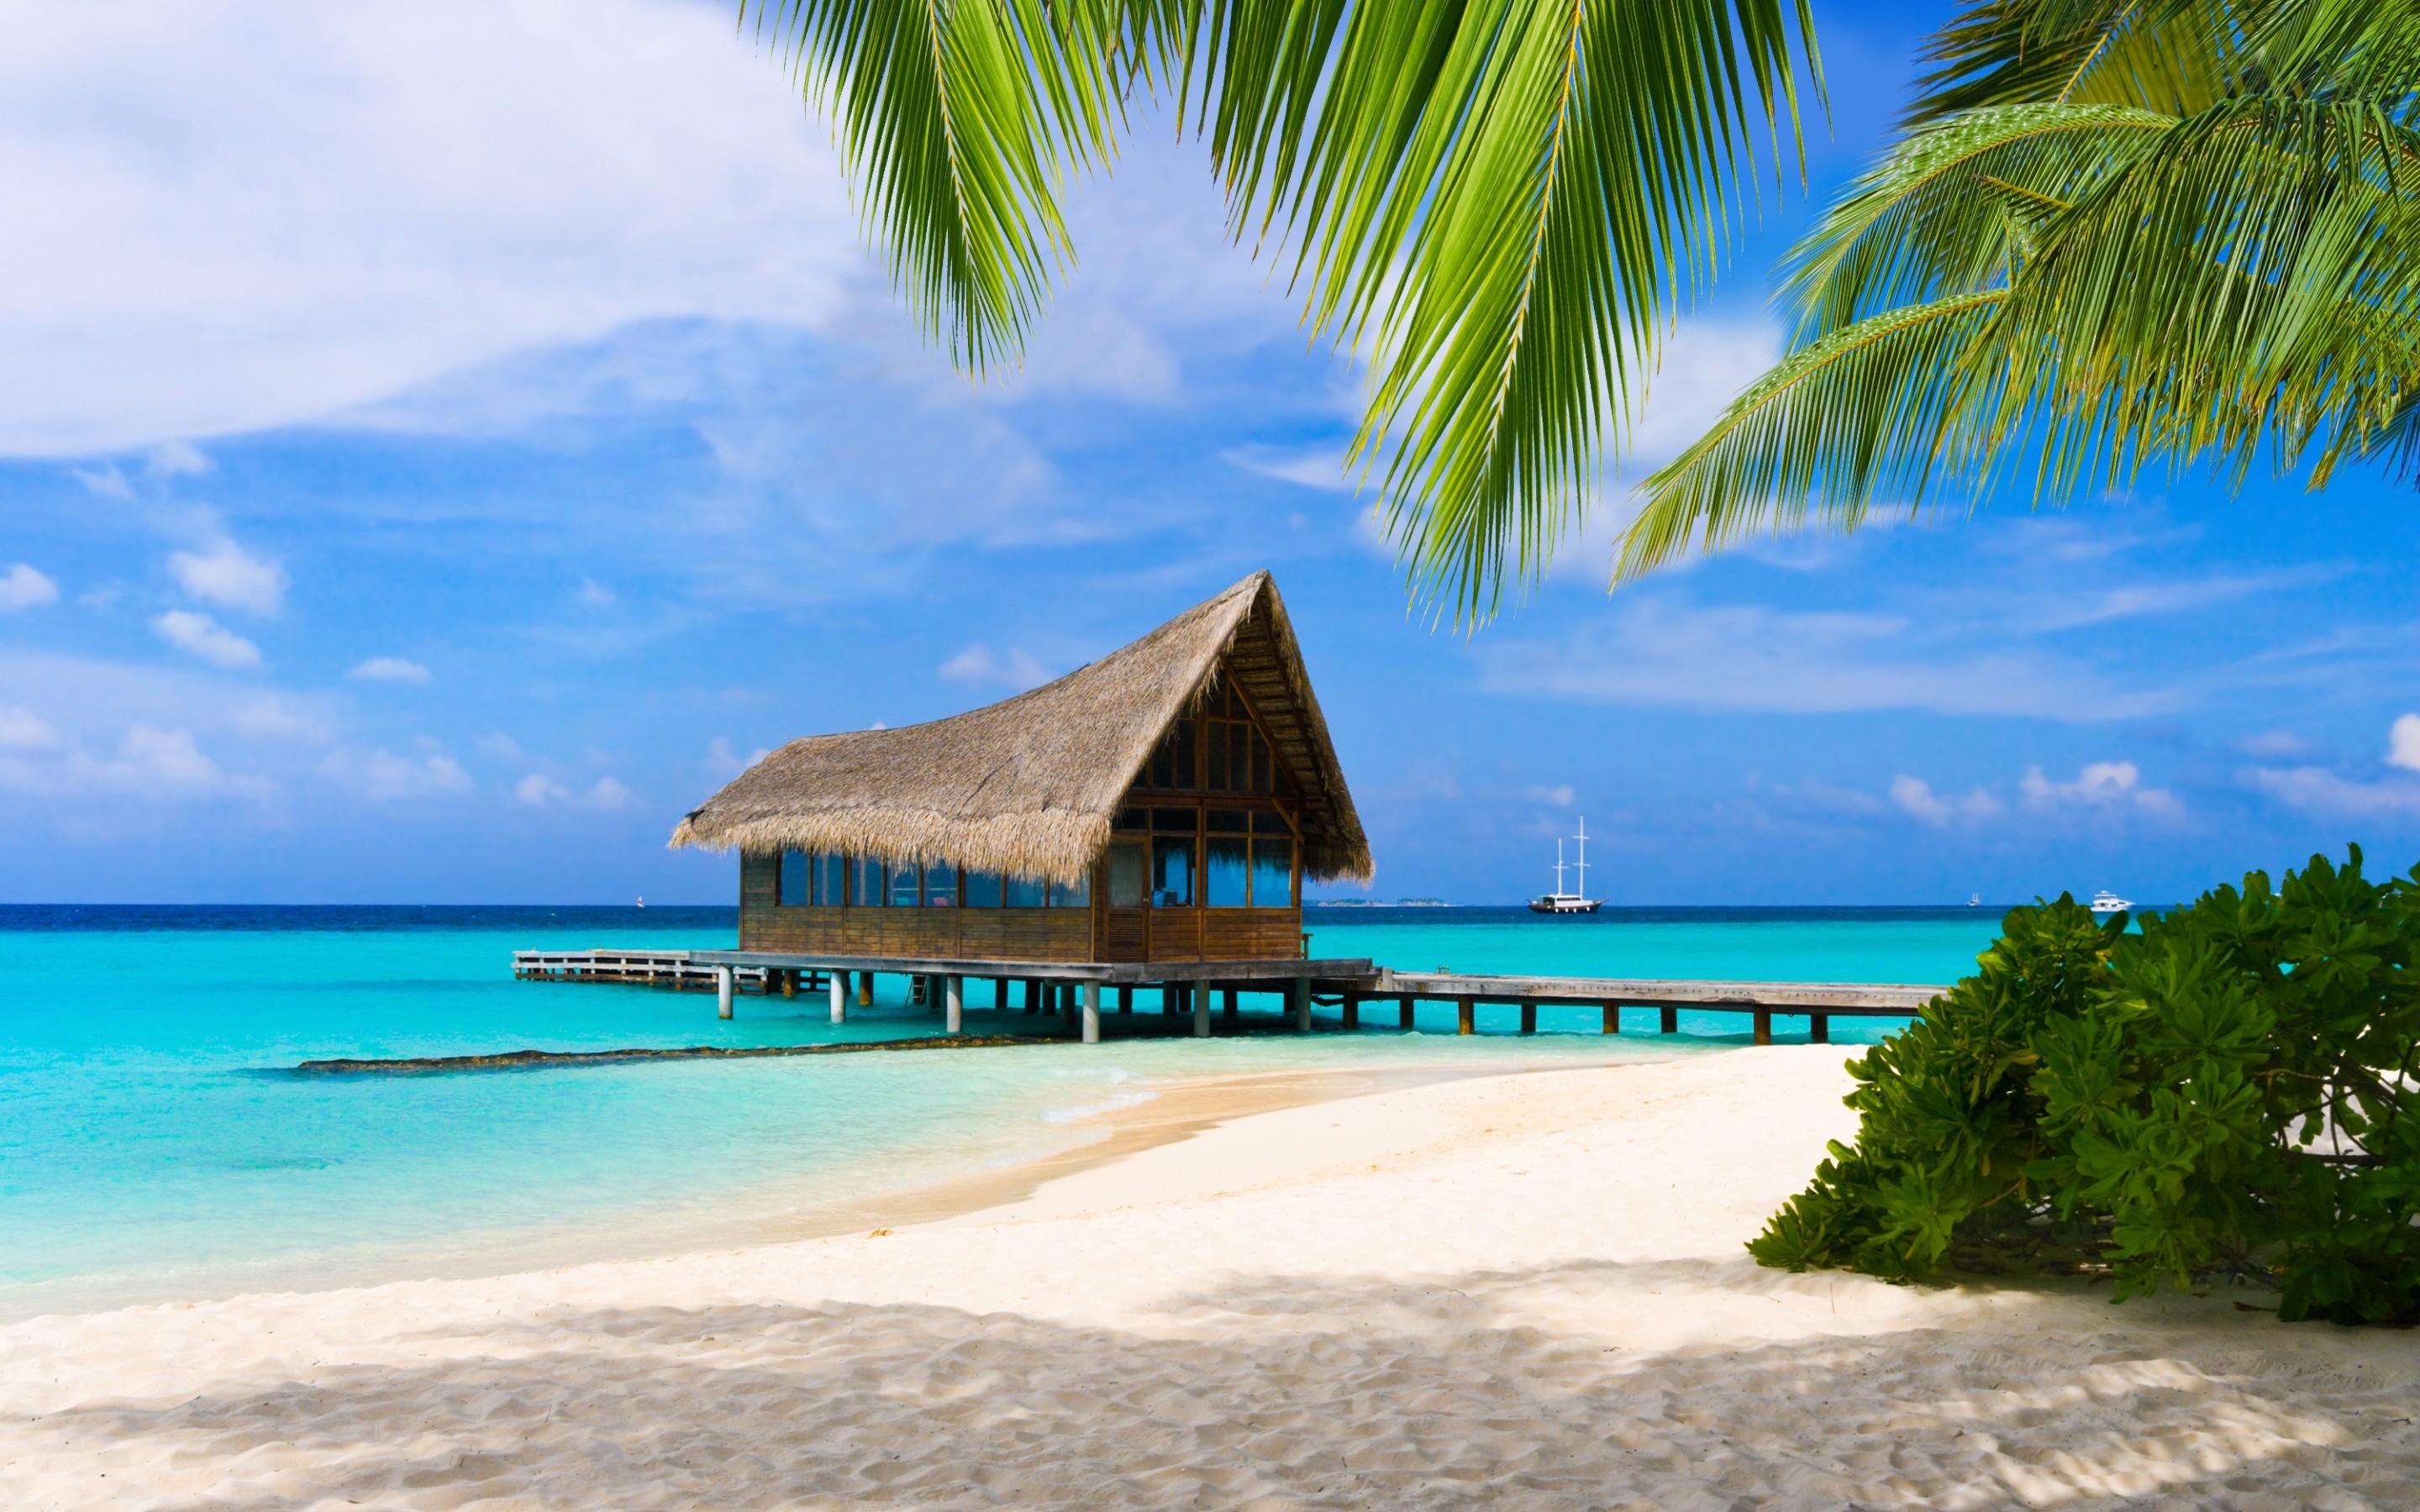 Bungalow in Maldives for 2880 x 1800 Retina Display resolution